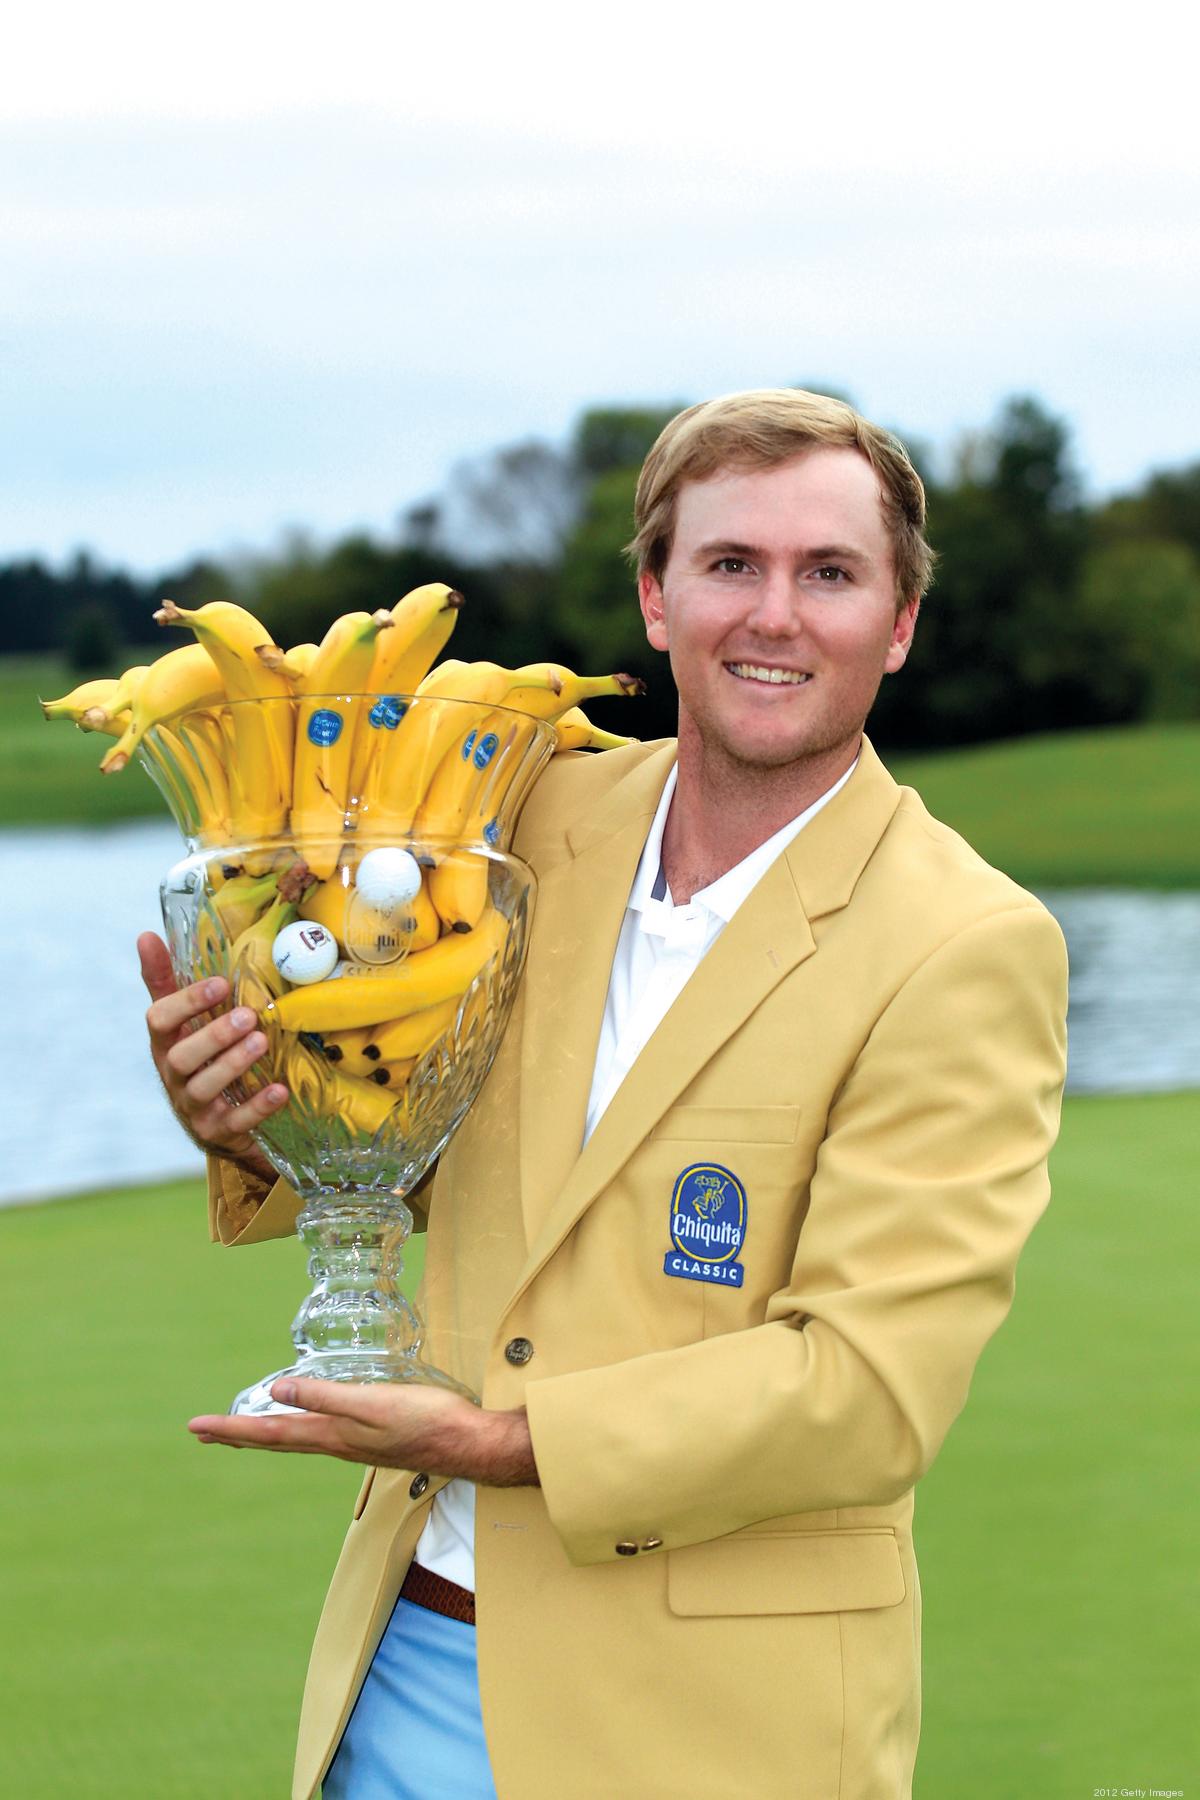 Pga Tour Shift Gives Chiquita Classic A Higher Profile Charlotte Business Journal